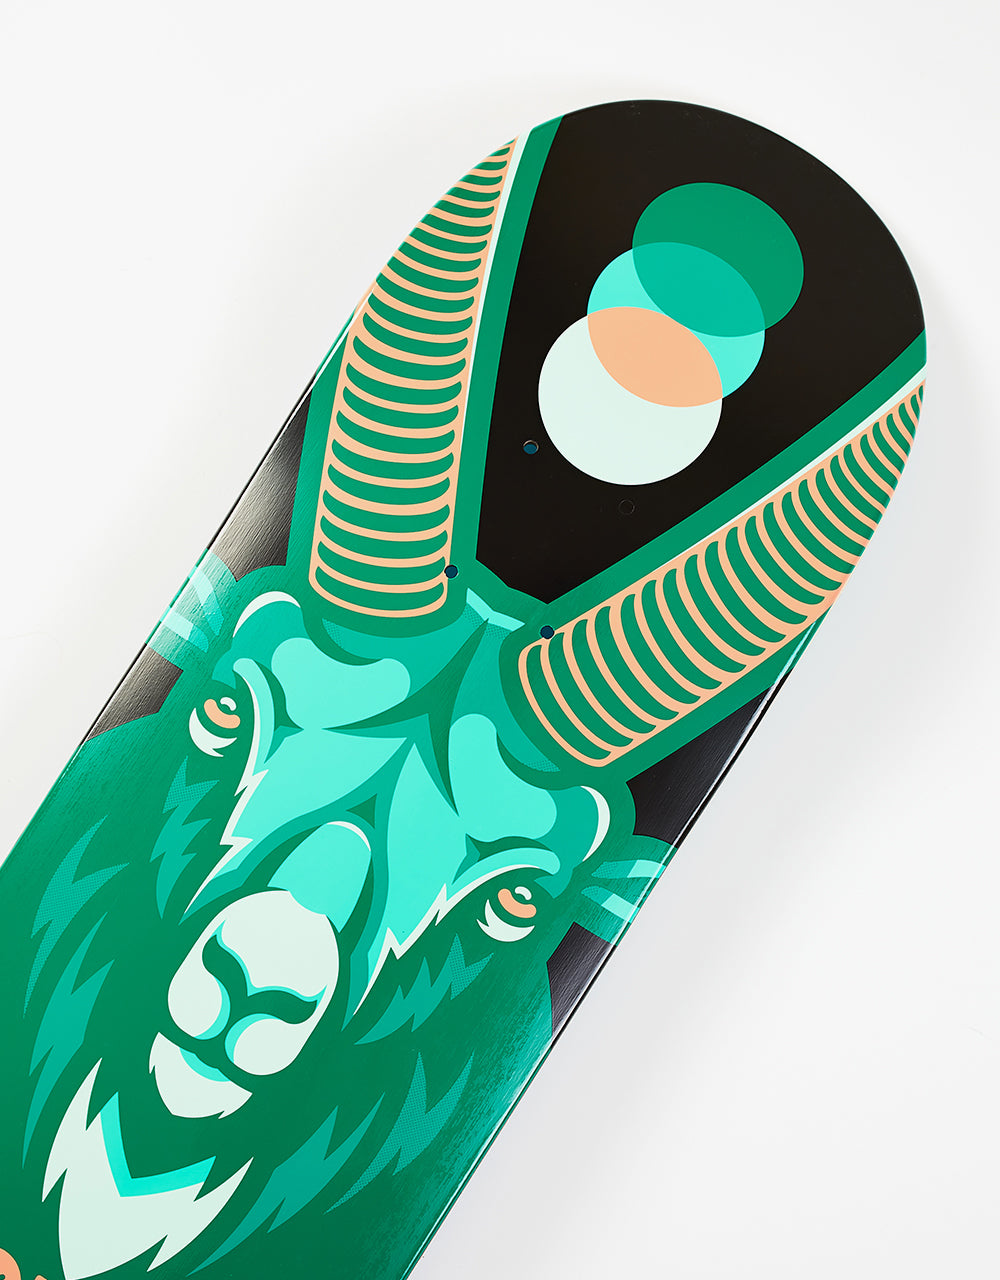 Route One Horned Beasts Skateboard Deck - 8.25"